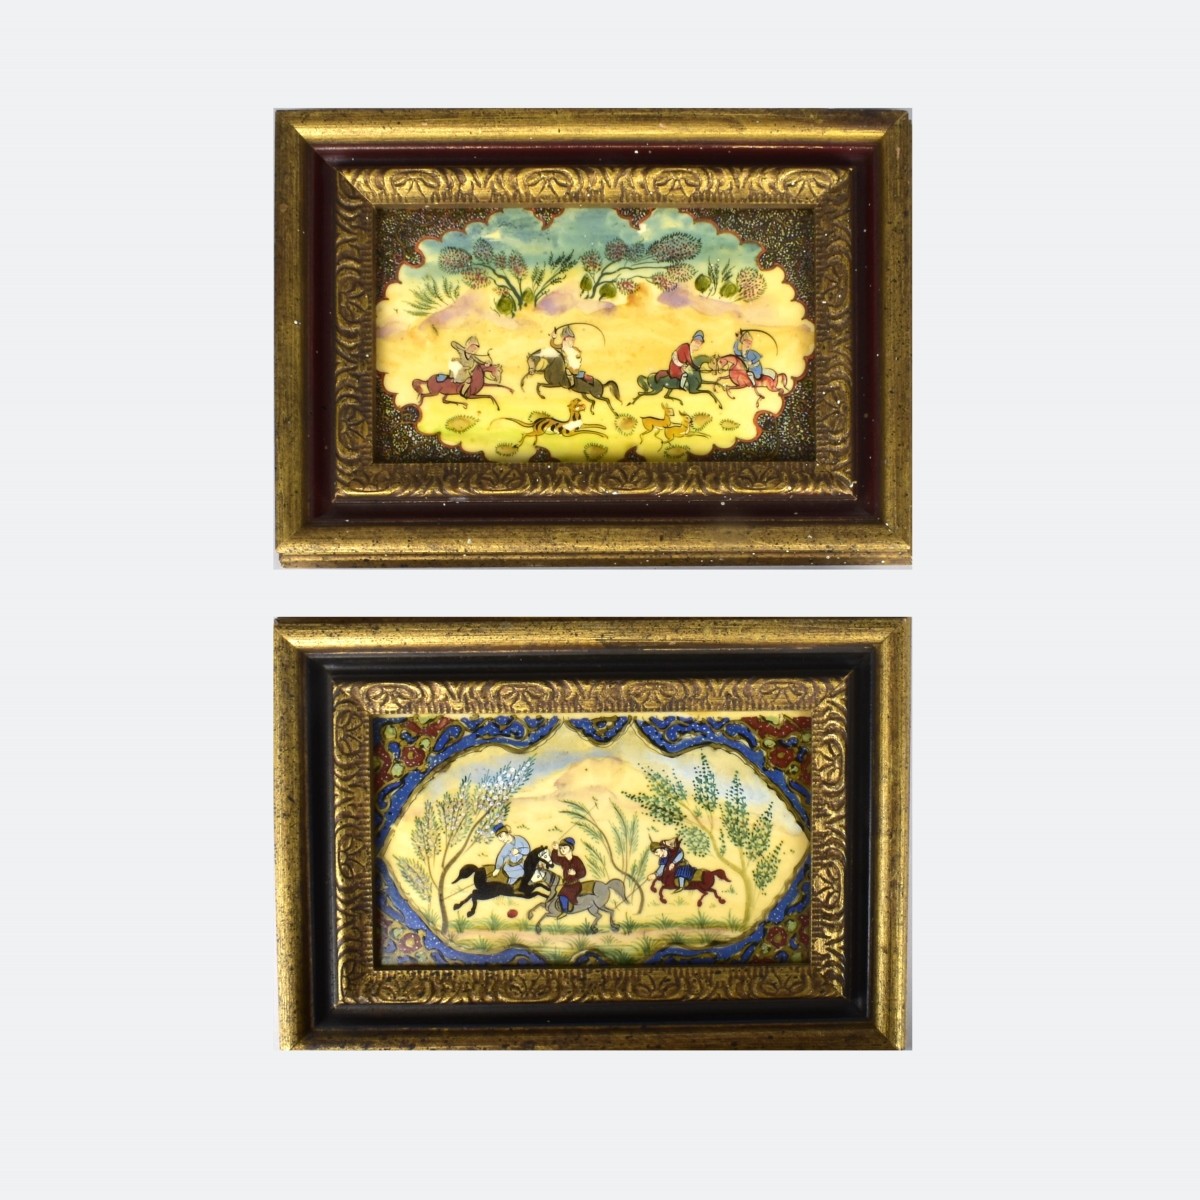 Pair of Framed Antique Persian Celluloid Paintings